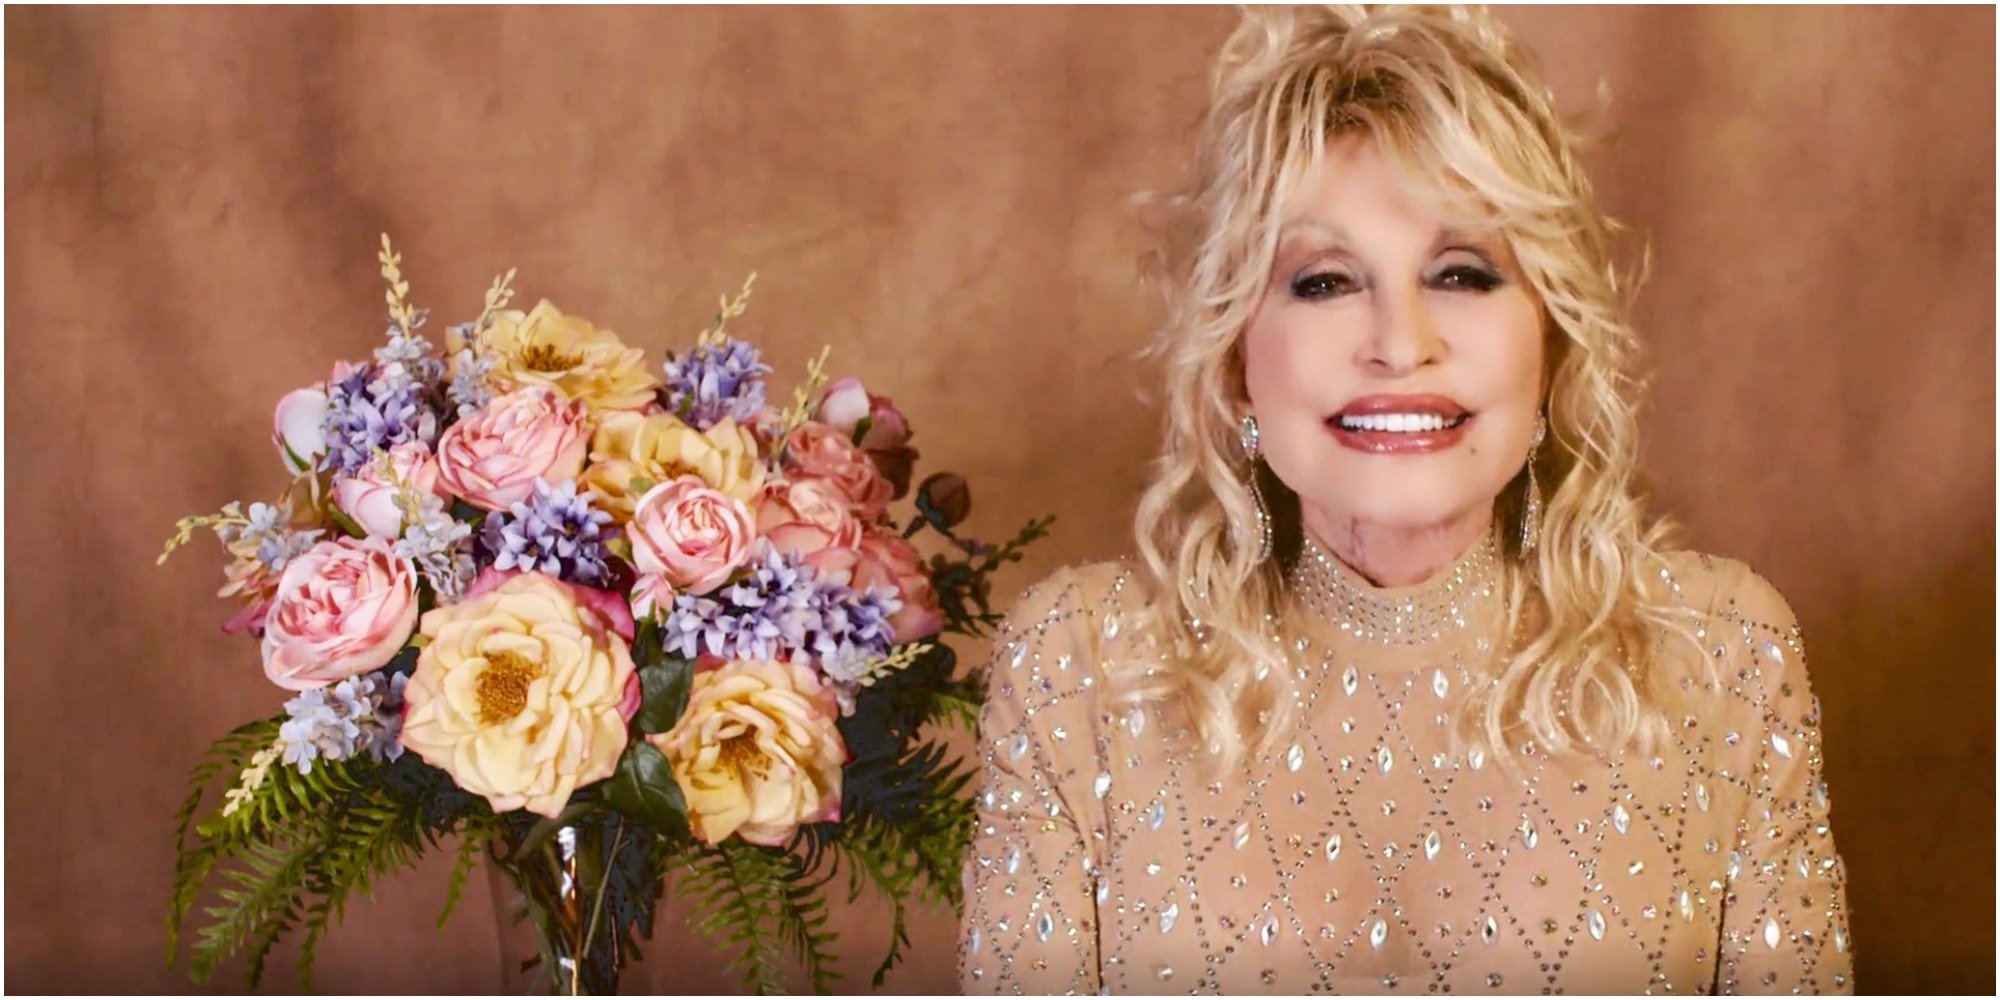 Dolly Parton fans will have to wait until the end of the 2021 Emmy Awards to see her as a presenter.